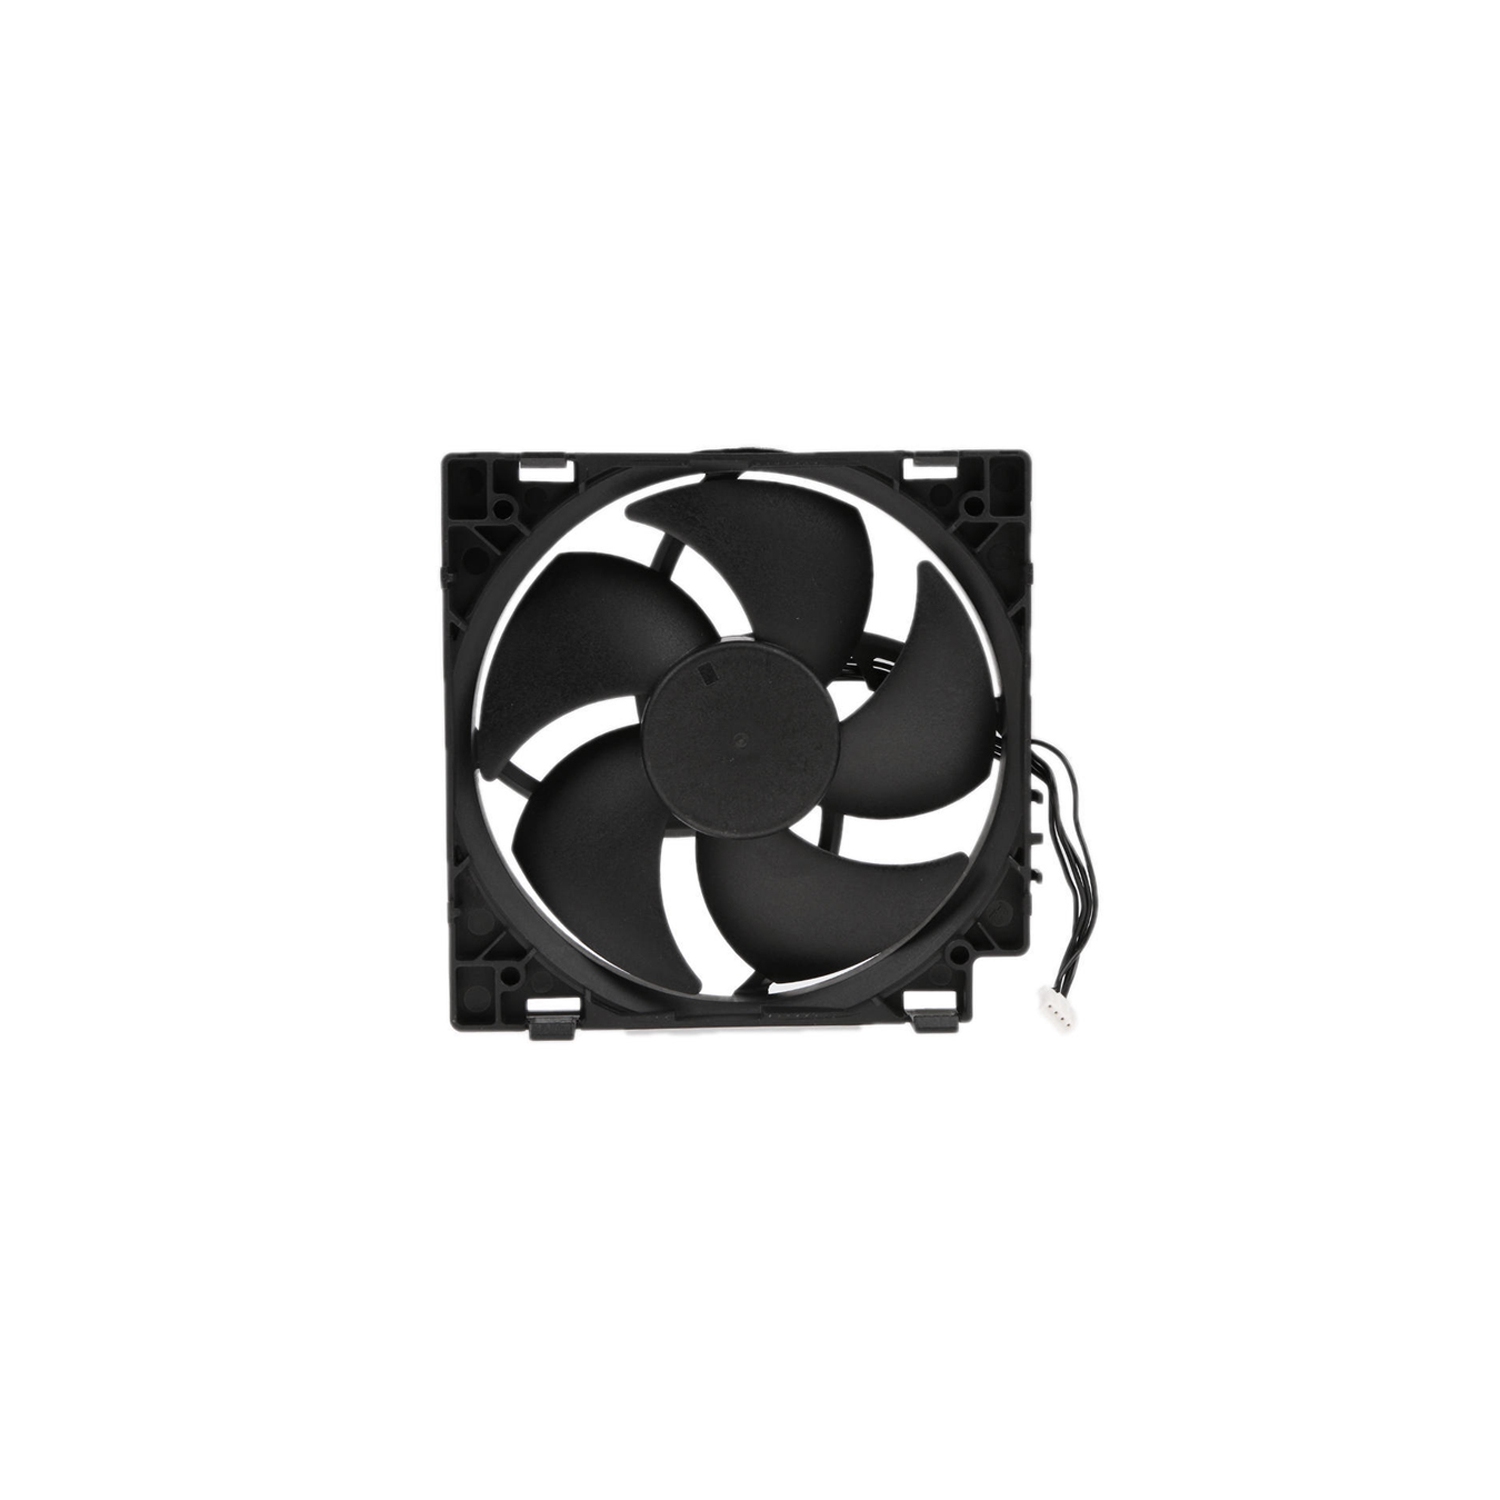 Replacement Internal Cooling Fan For Microsoft Xbox One S